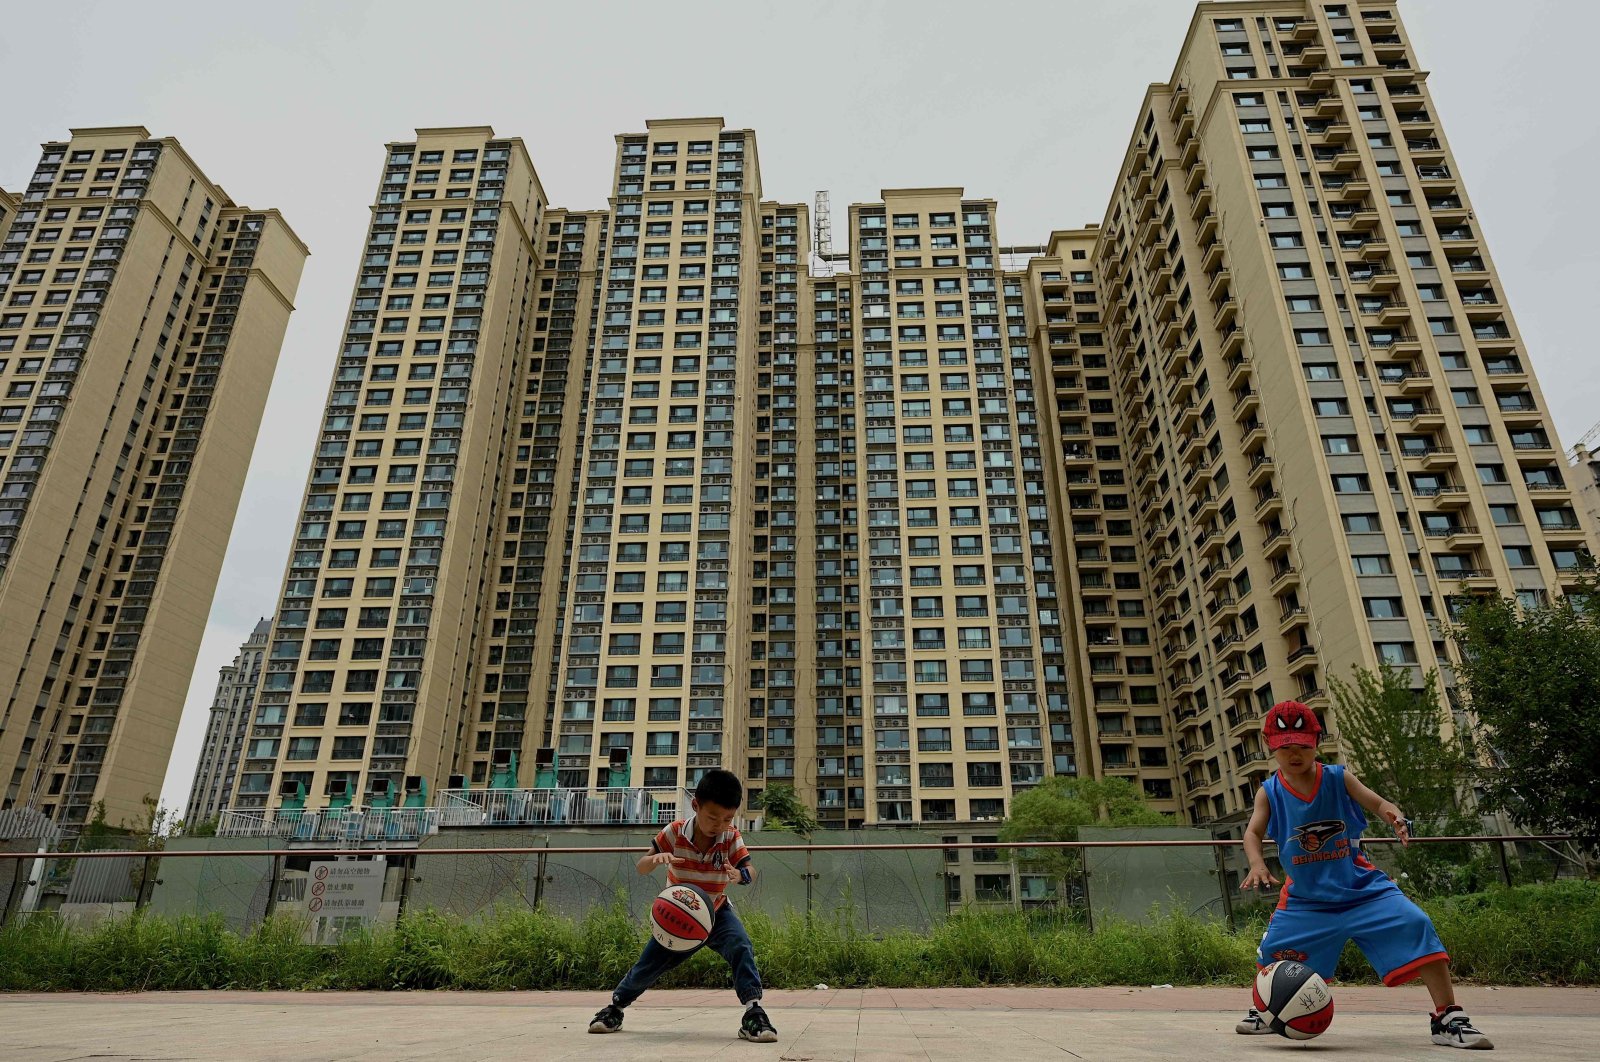 This file photo shows children playing basketball in front of a housing complex constructed by Chinese property developer Evergrande in Beijing, China, July 28, 2022. (AFP Photo)